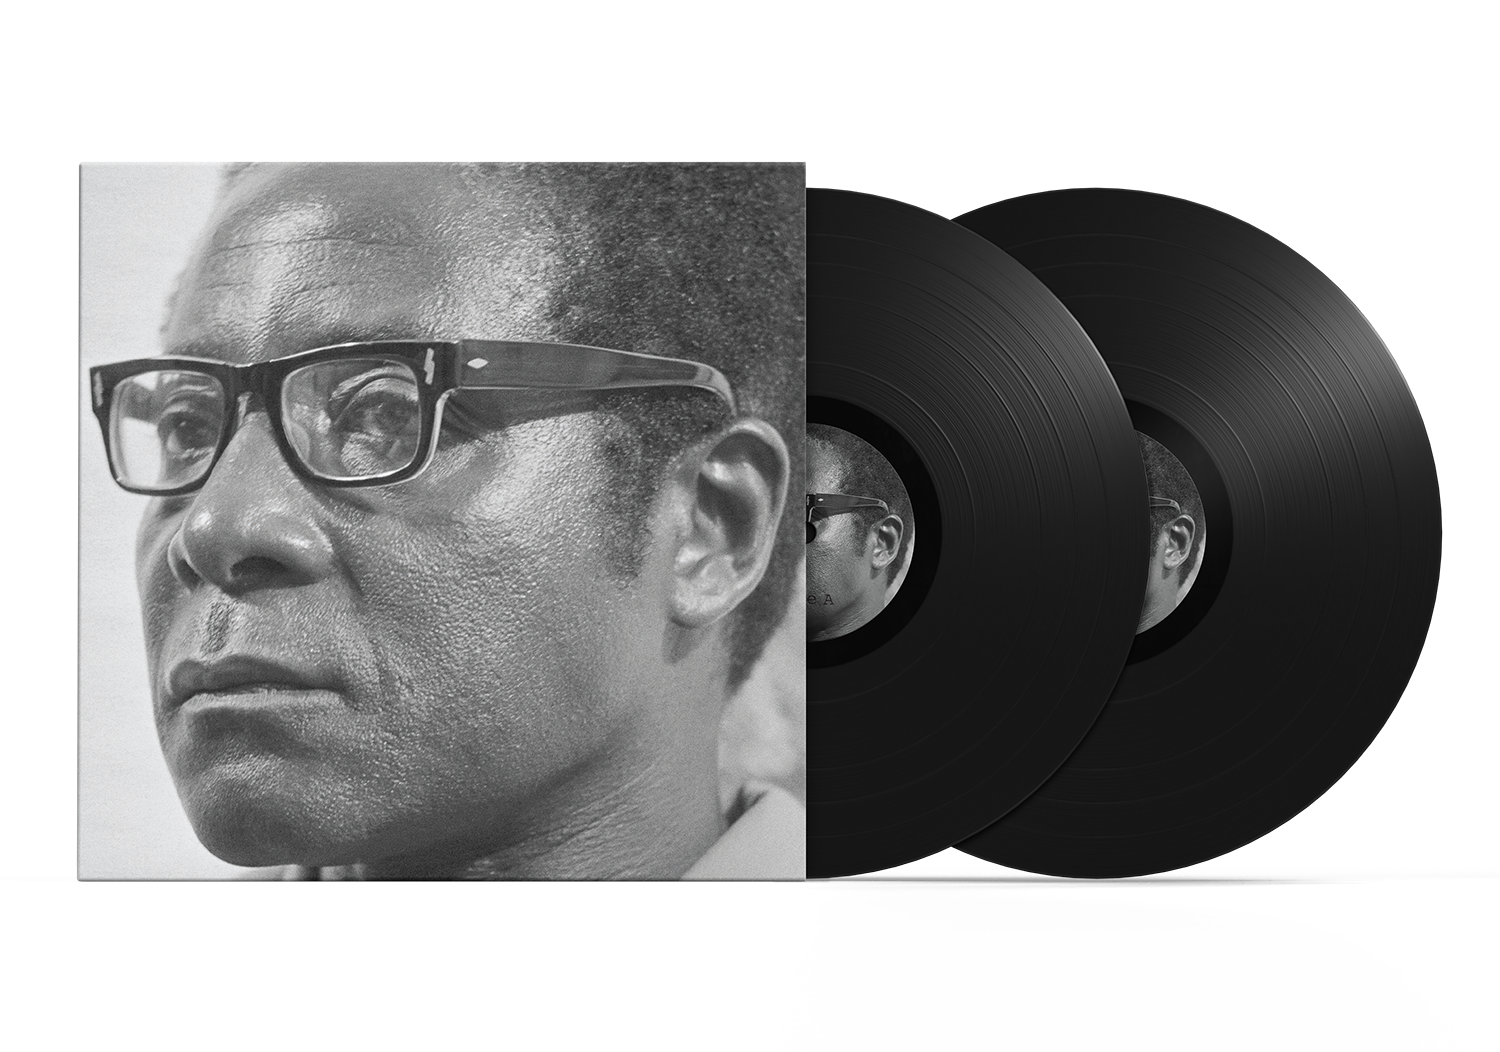 billy woods - History Will Absolve Me [10 YRS 2xLP]